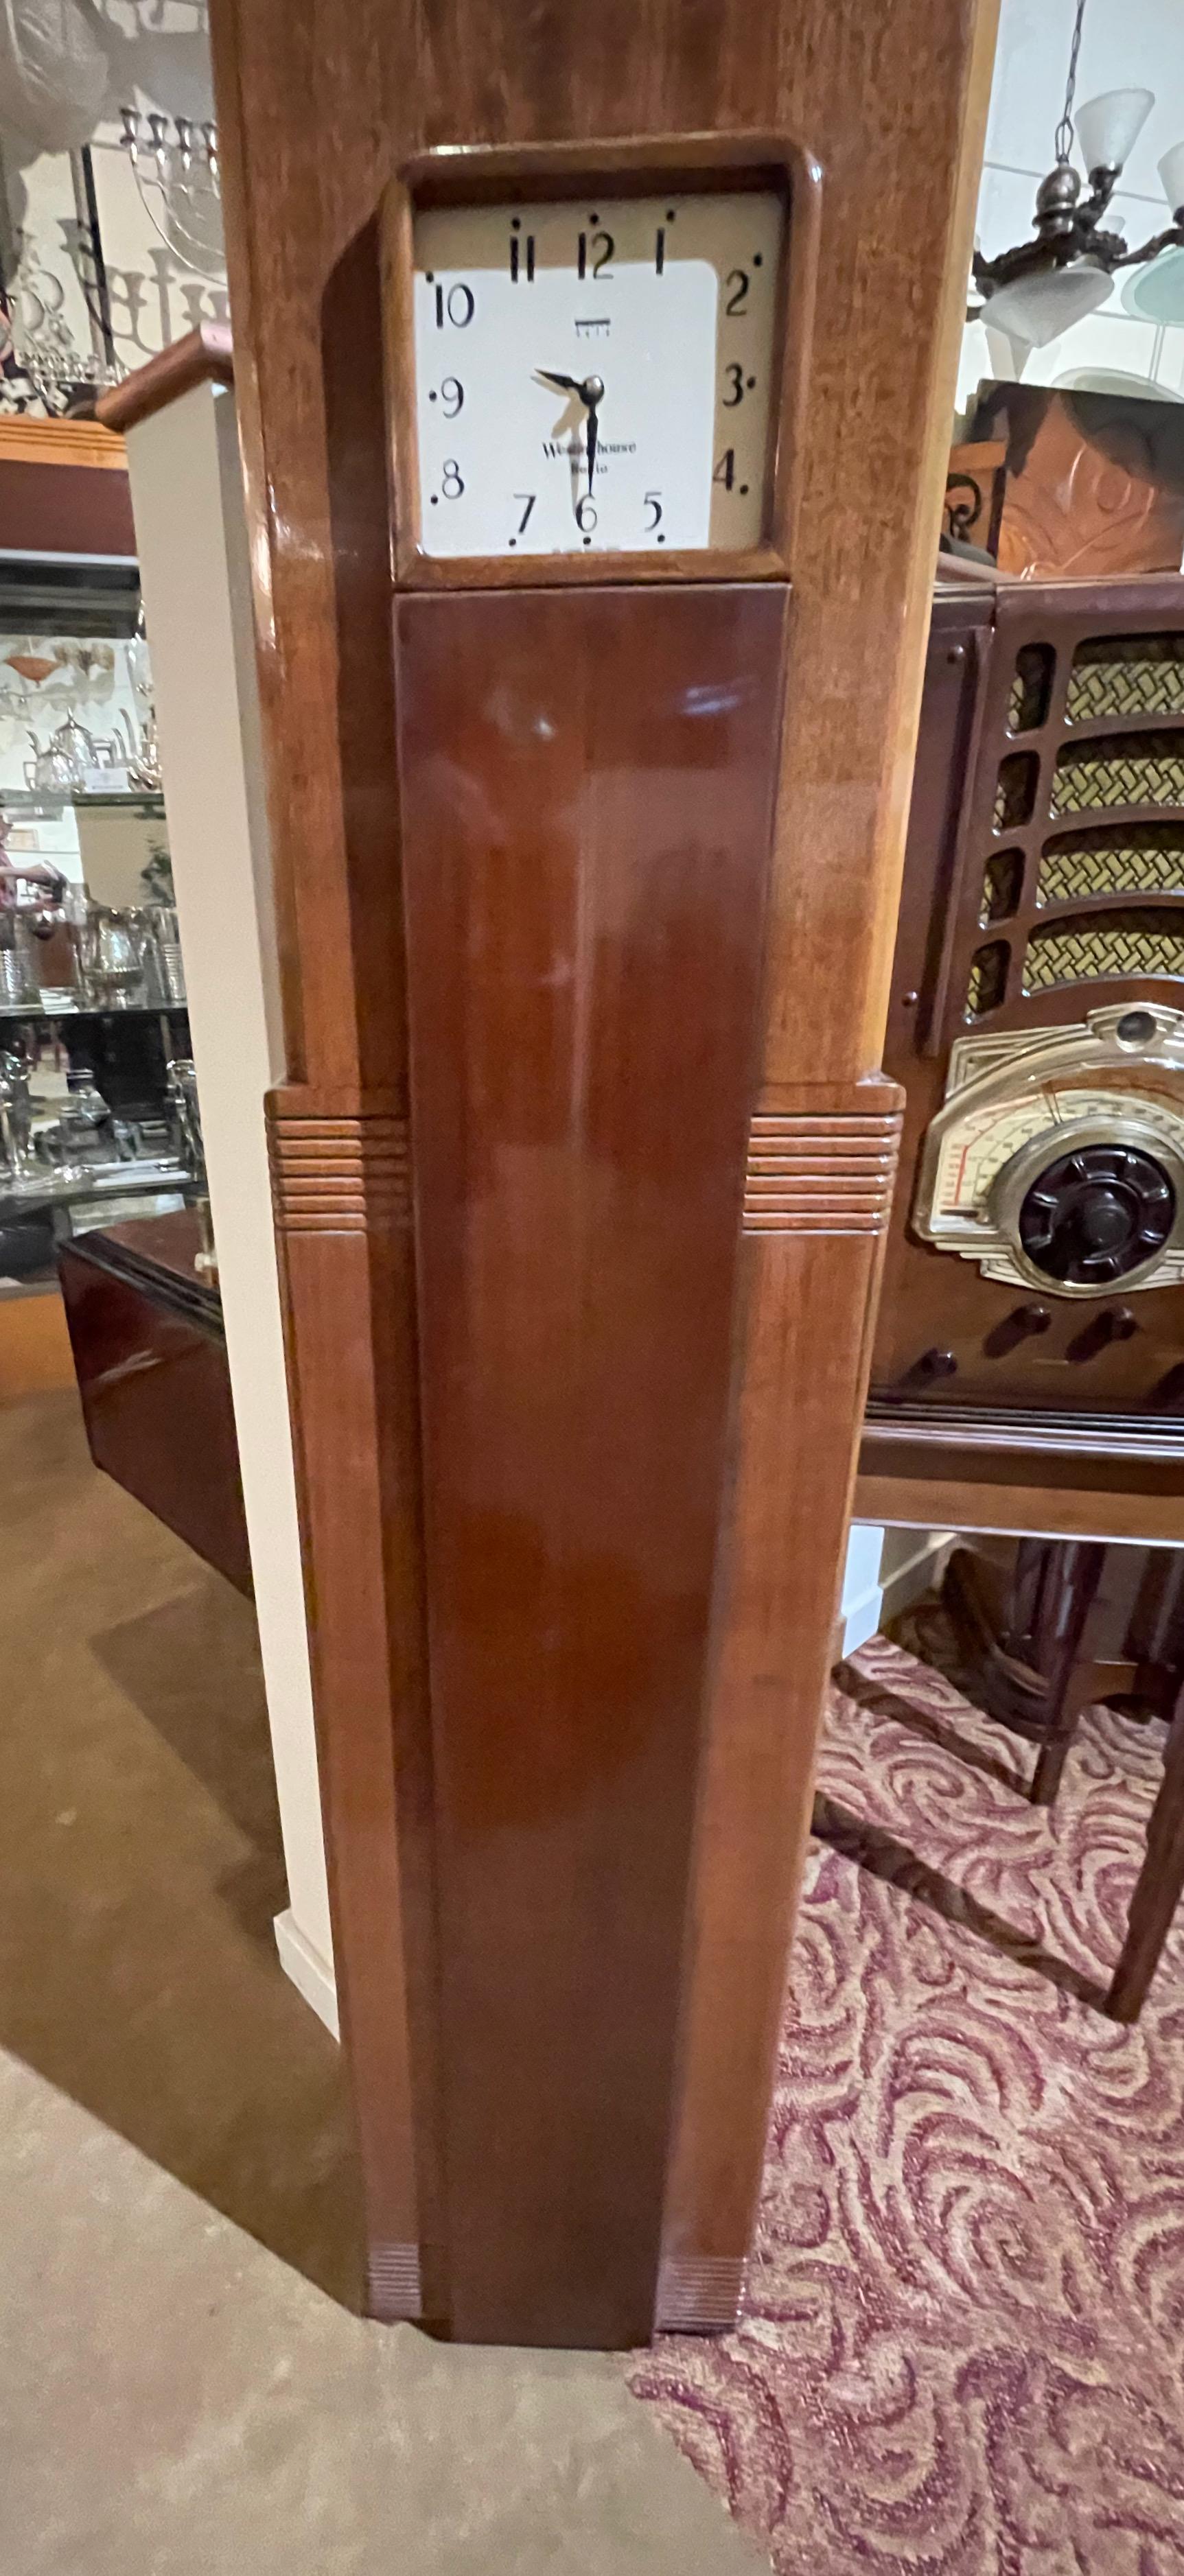 Art Deco Design in 1931 by Raymond Loewy for RCA Westinghouse. Lowey one of the most prominent industrial designers of the 20th century. At the time, Westinghouse was the frontrunner for all of the copycat Skyscraper radios to follow. This